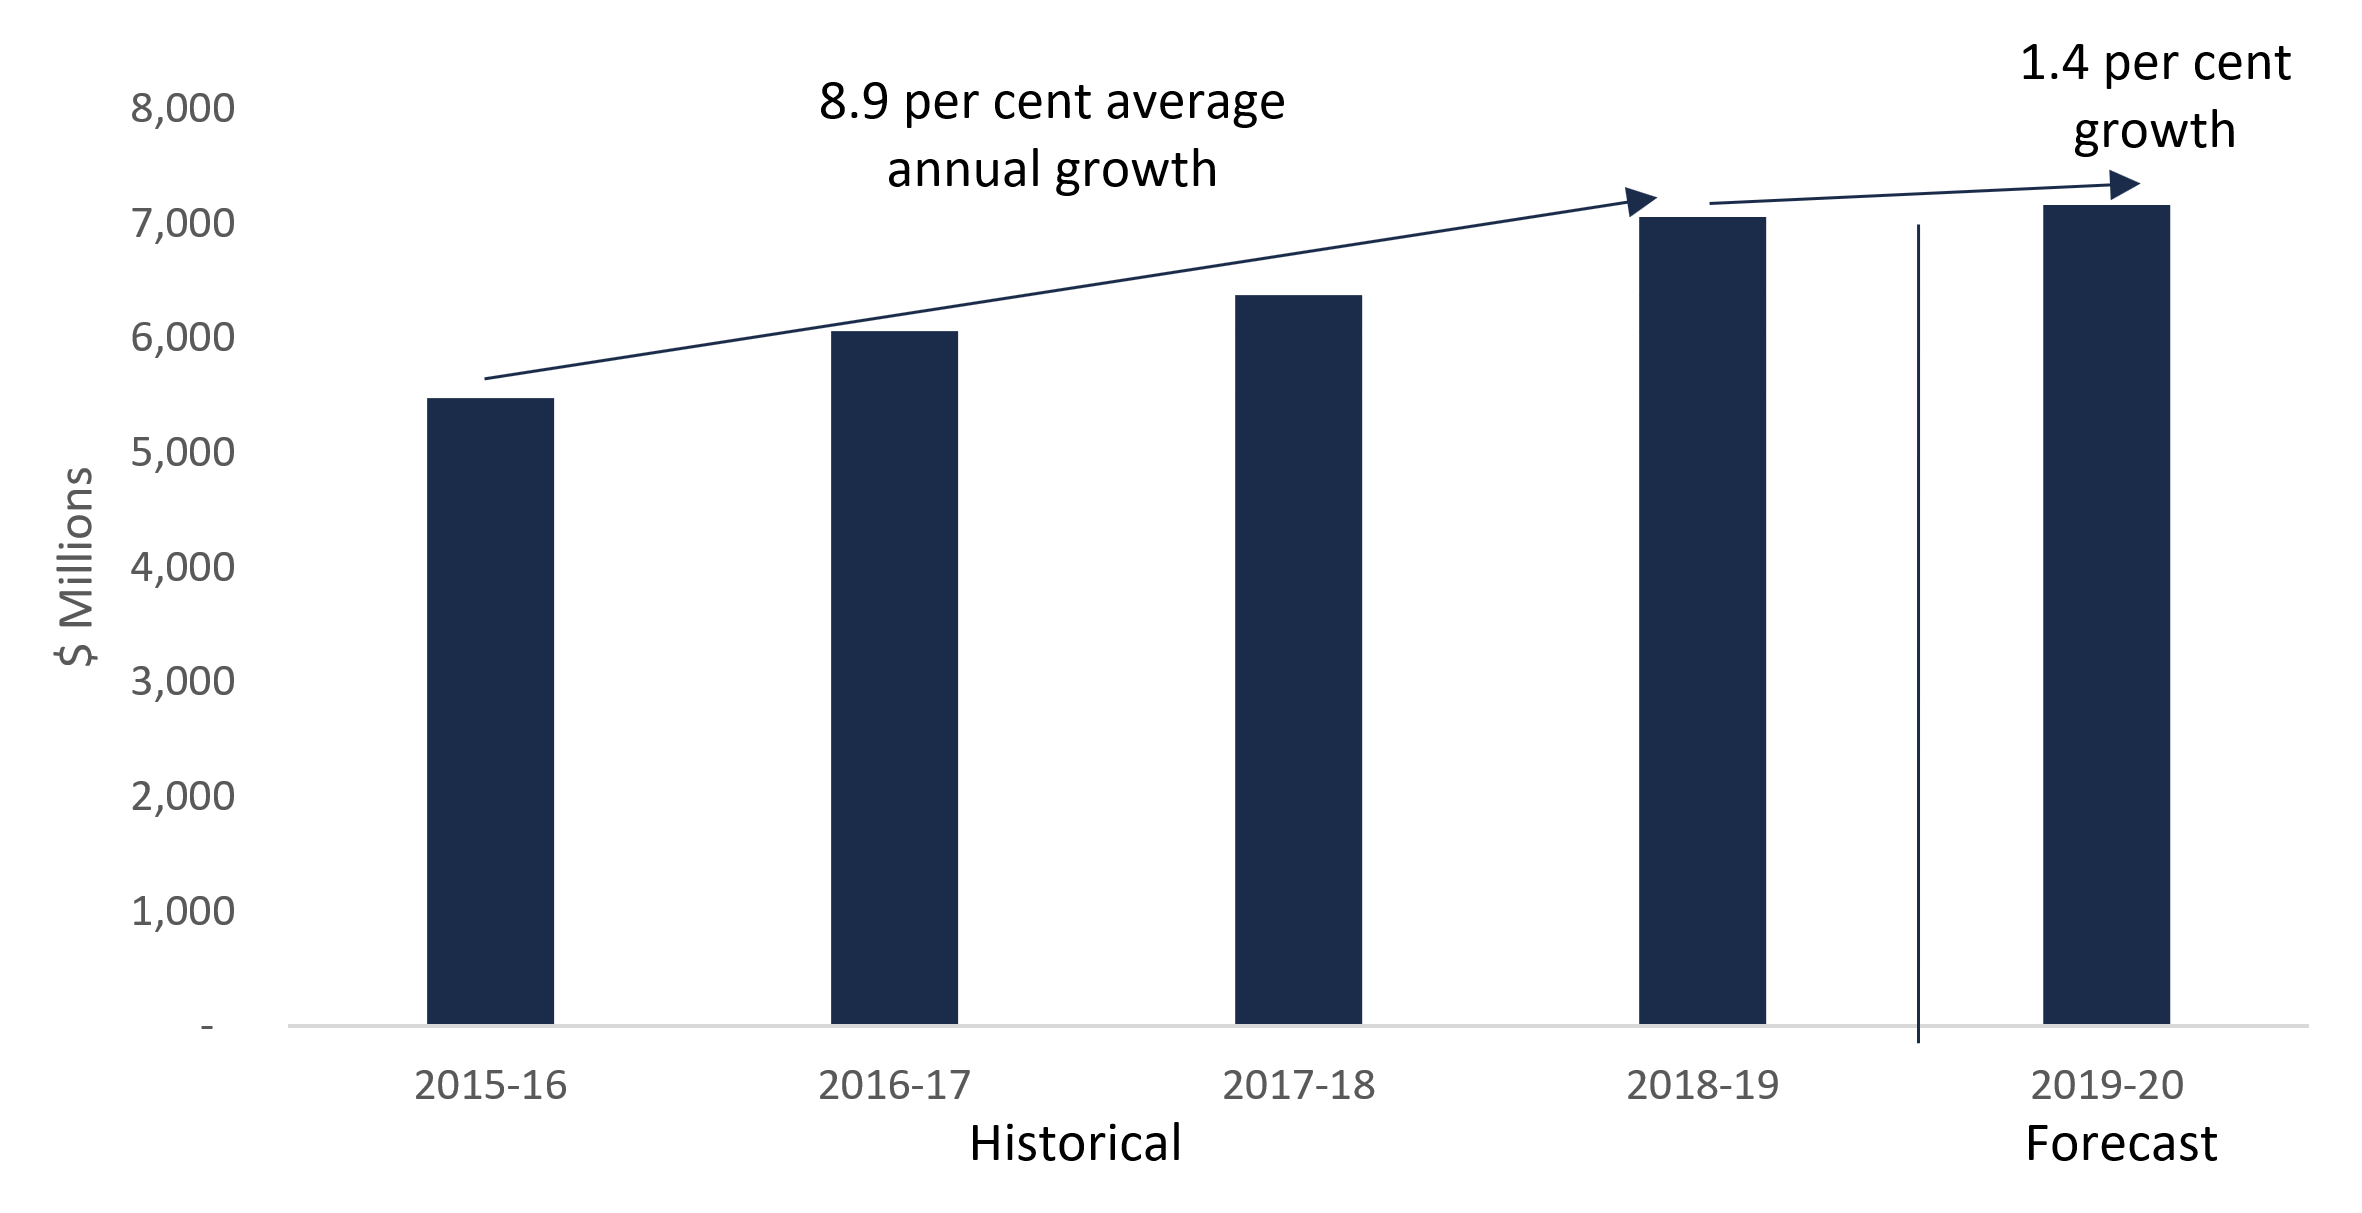 Service fee revenue growth, 2015-16 to 2019-20